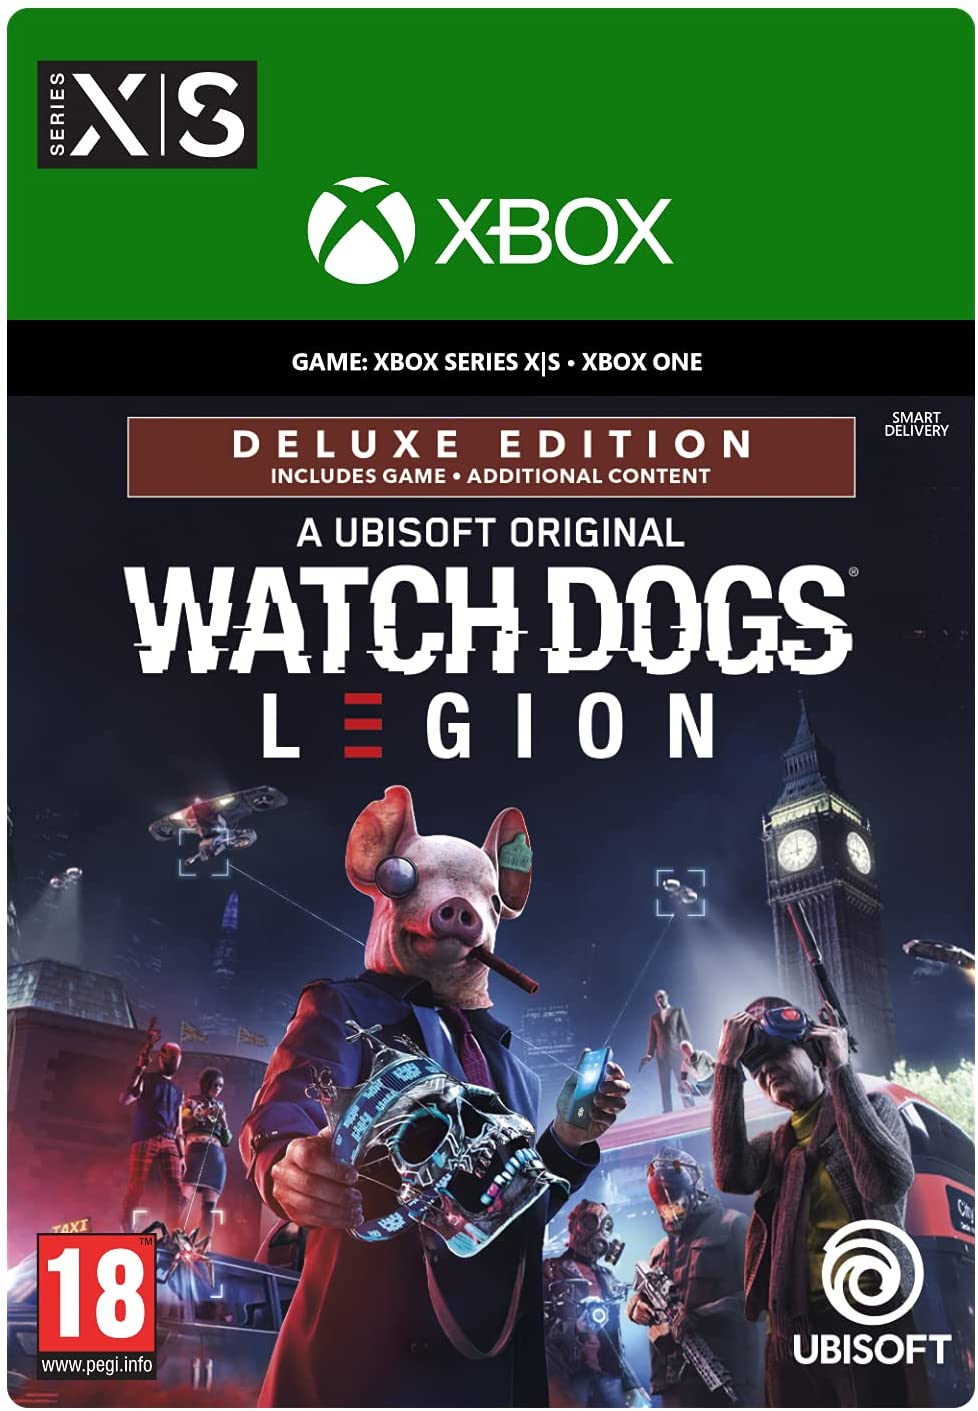 Watch Dogs: Legion - Deluxe Edition VPN ACTIVATED Key (Xbox)